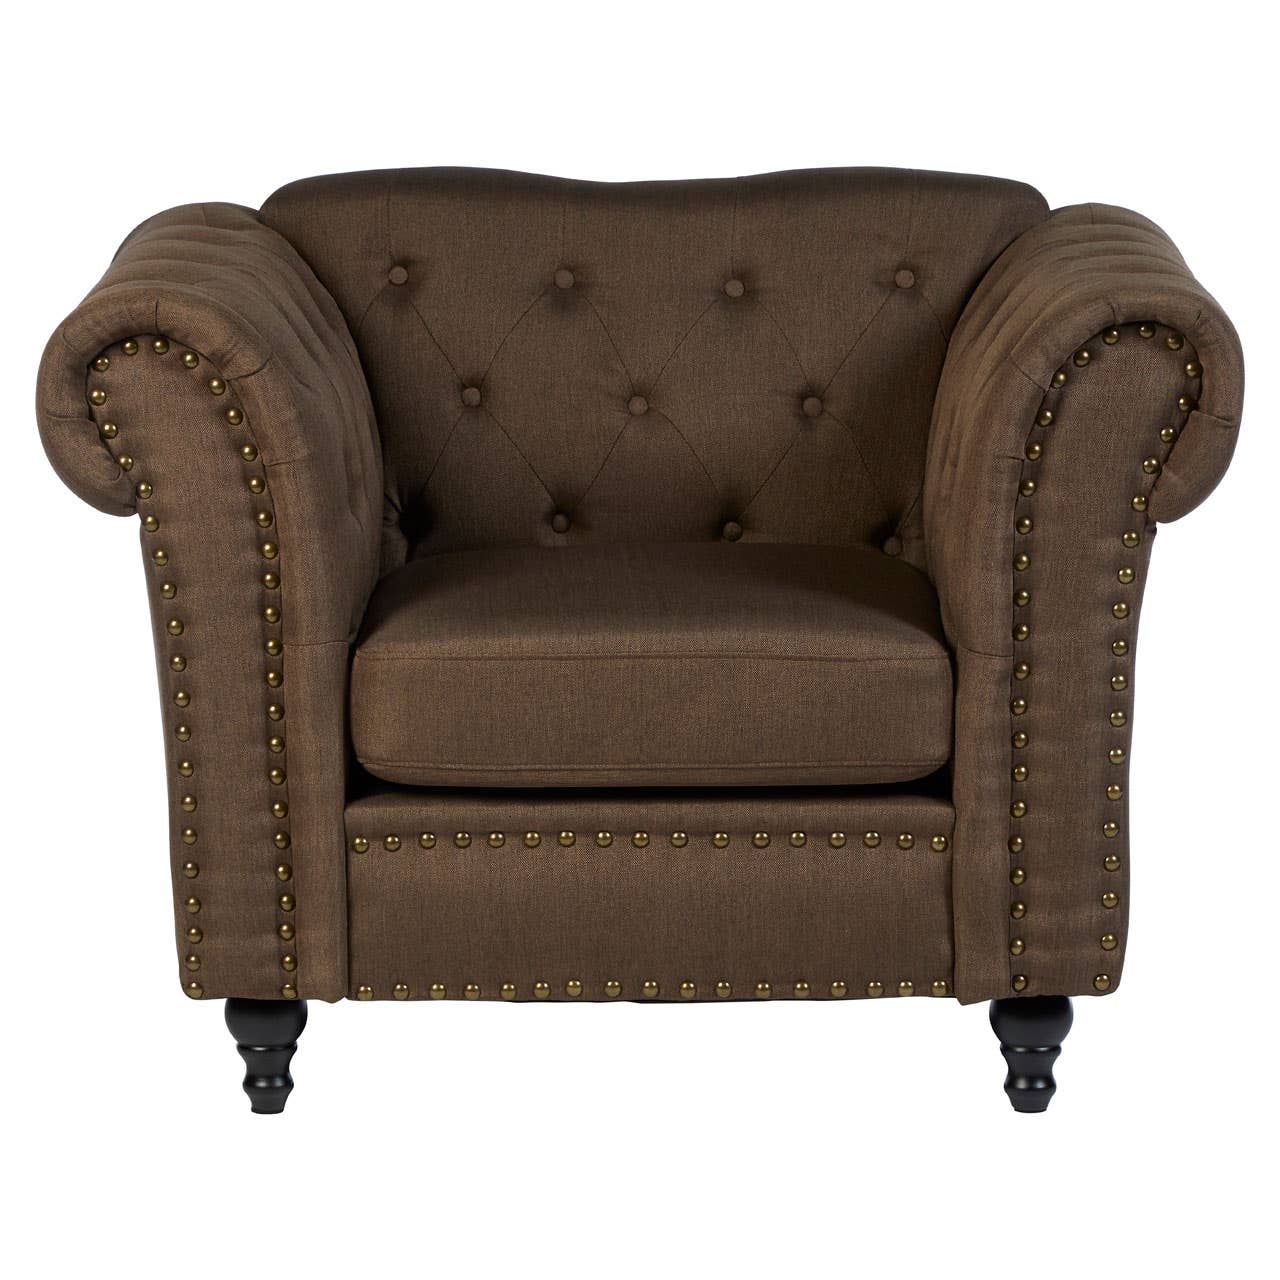 Fable Natural Chesterfield Chair